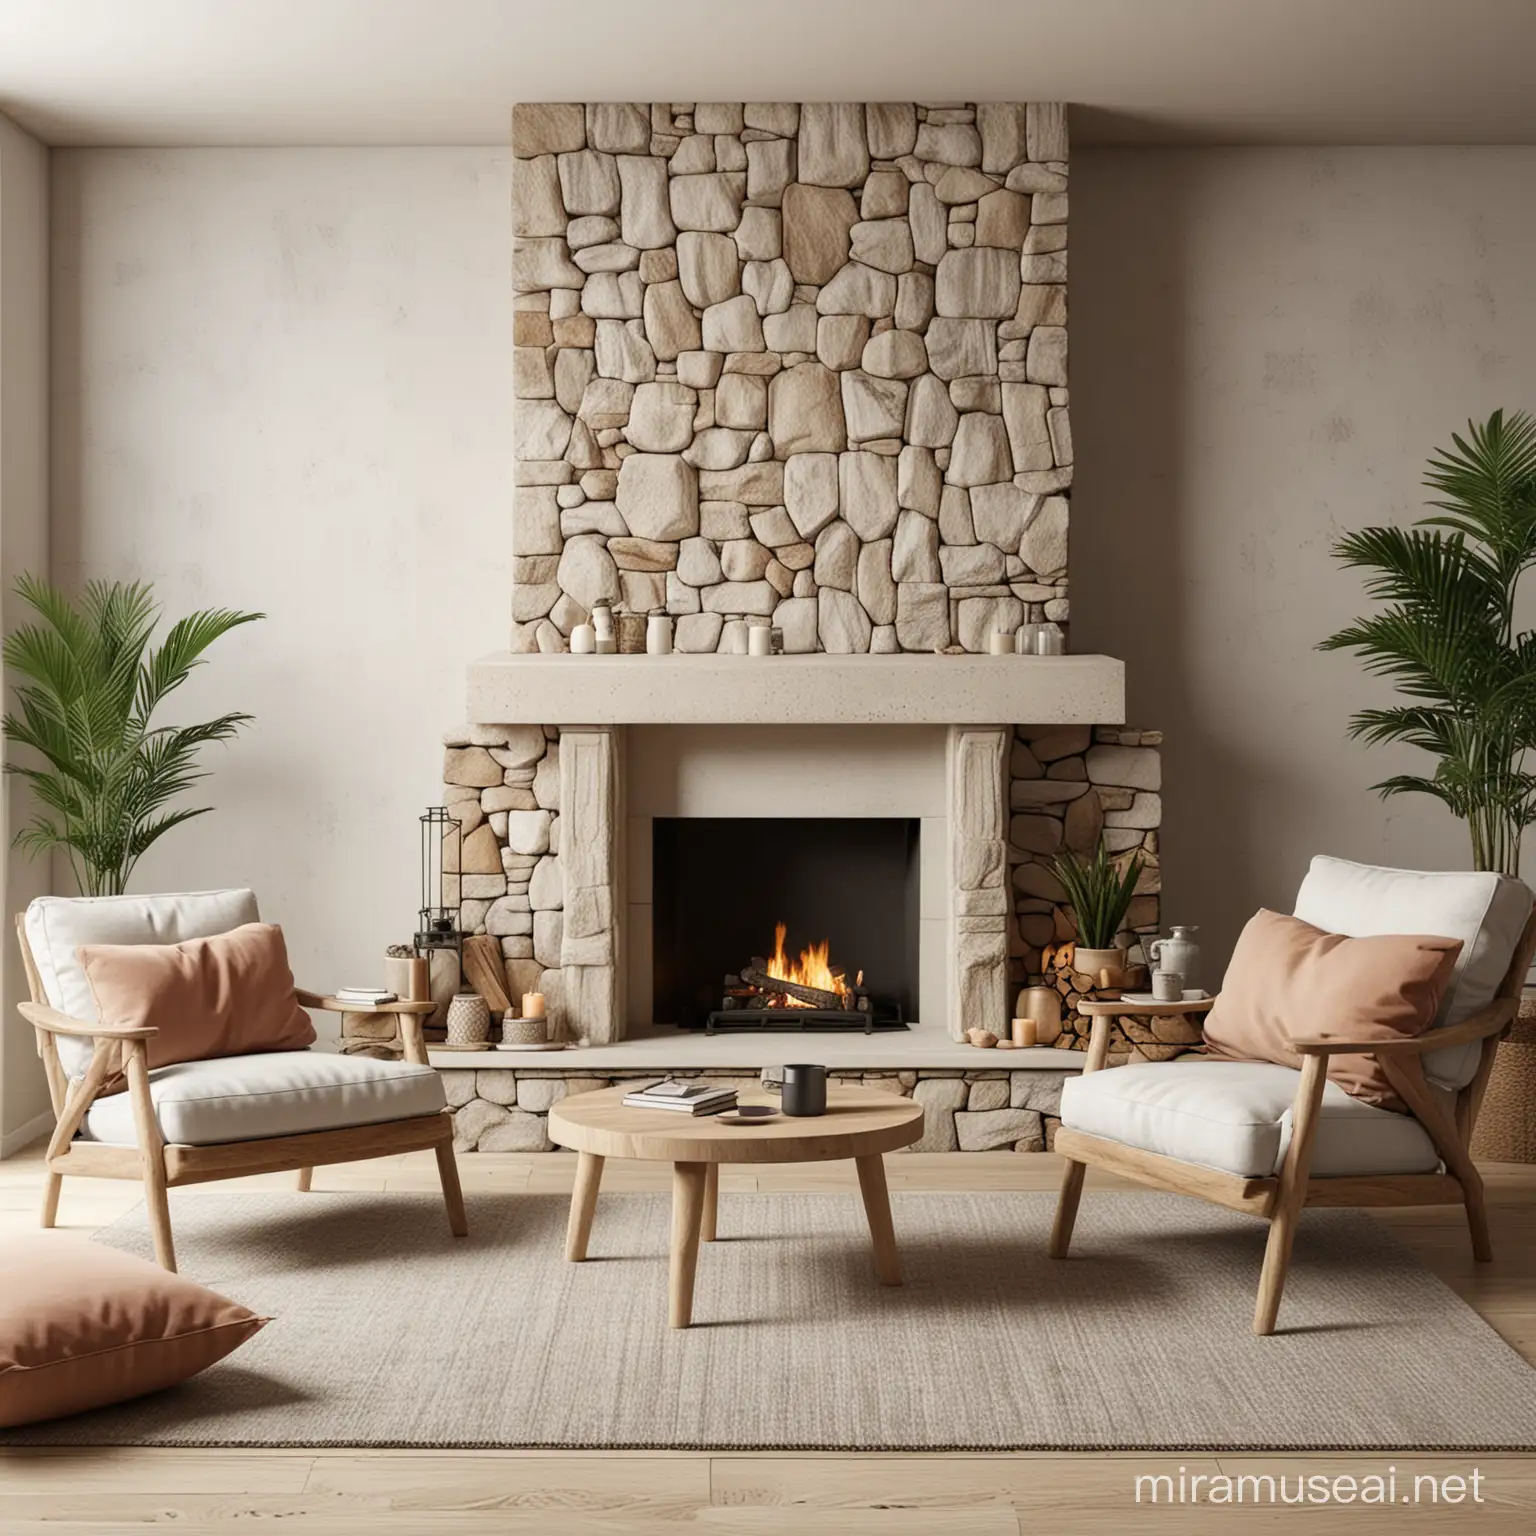 Boho Living Room with Stone Fireplace and Two Armchairs Cozy Mockup Interior Design